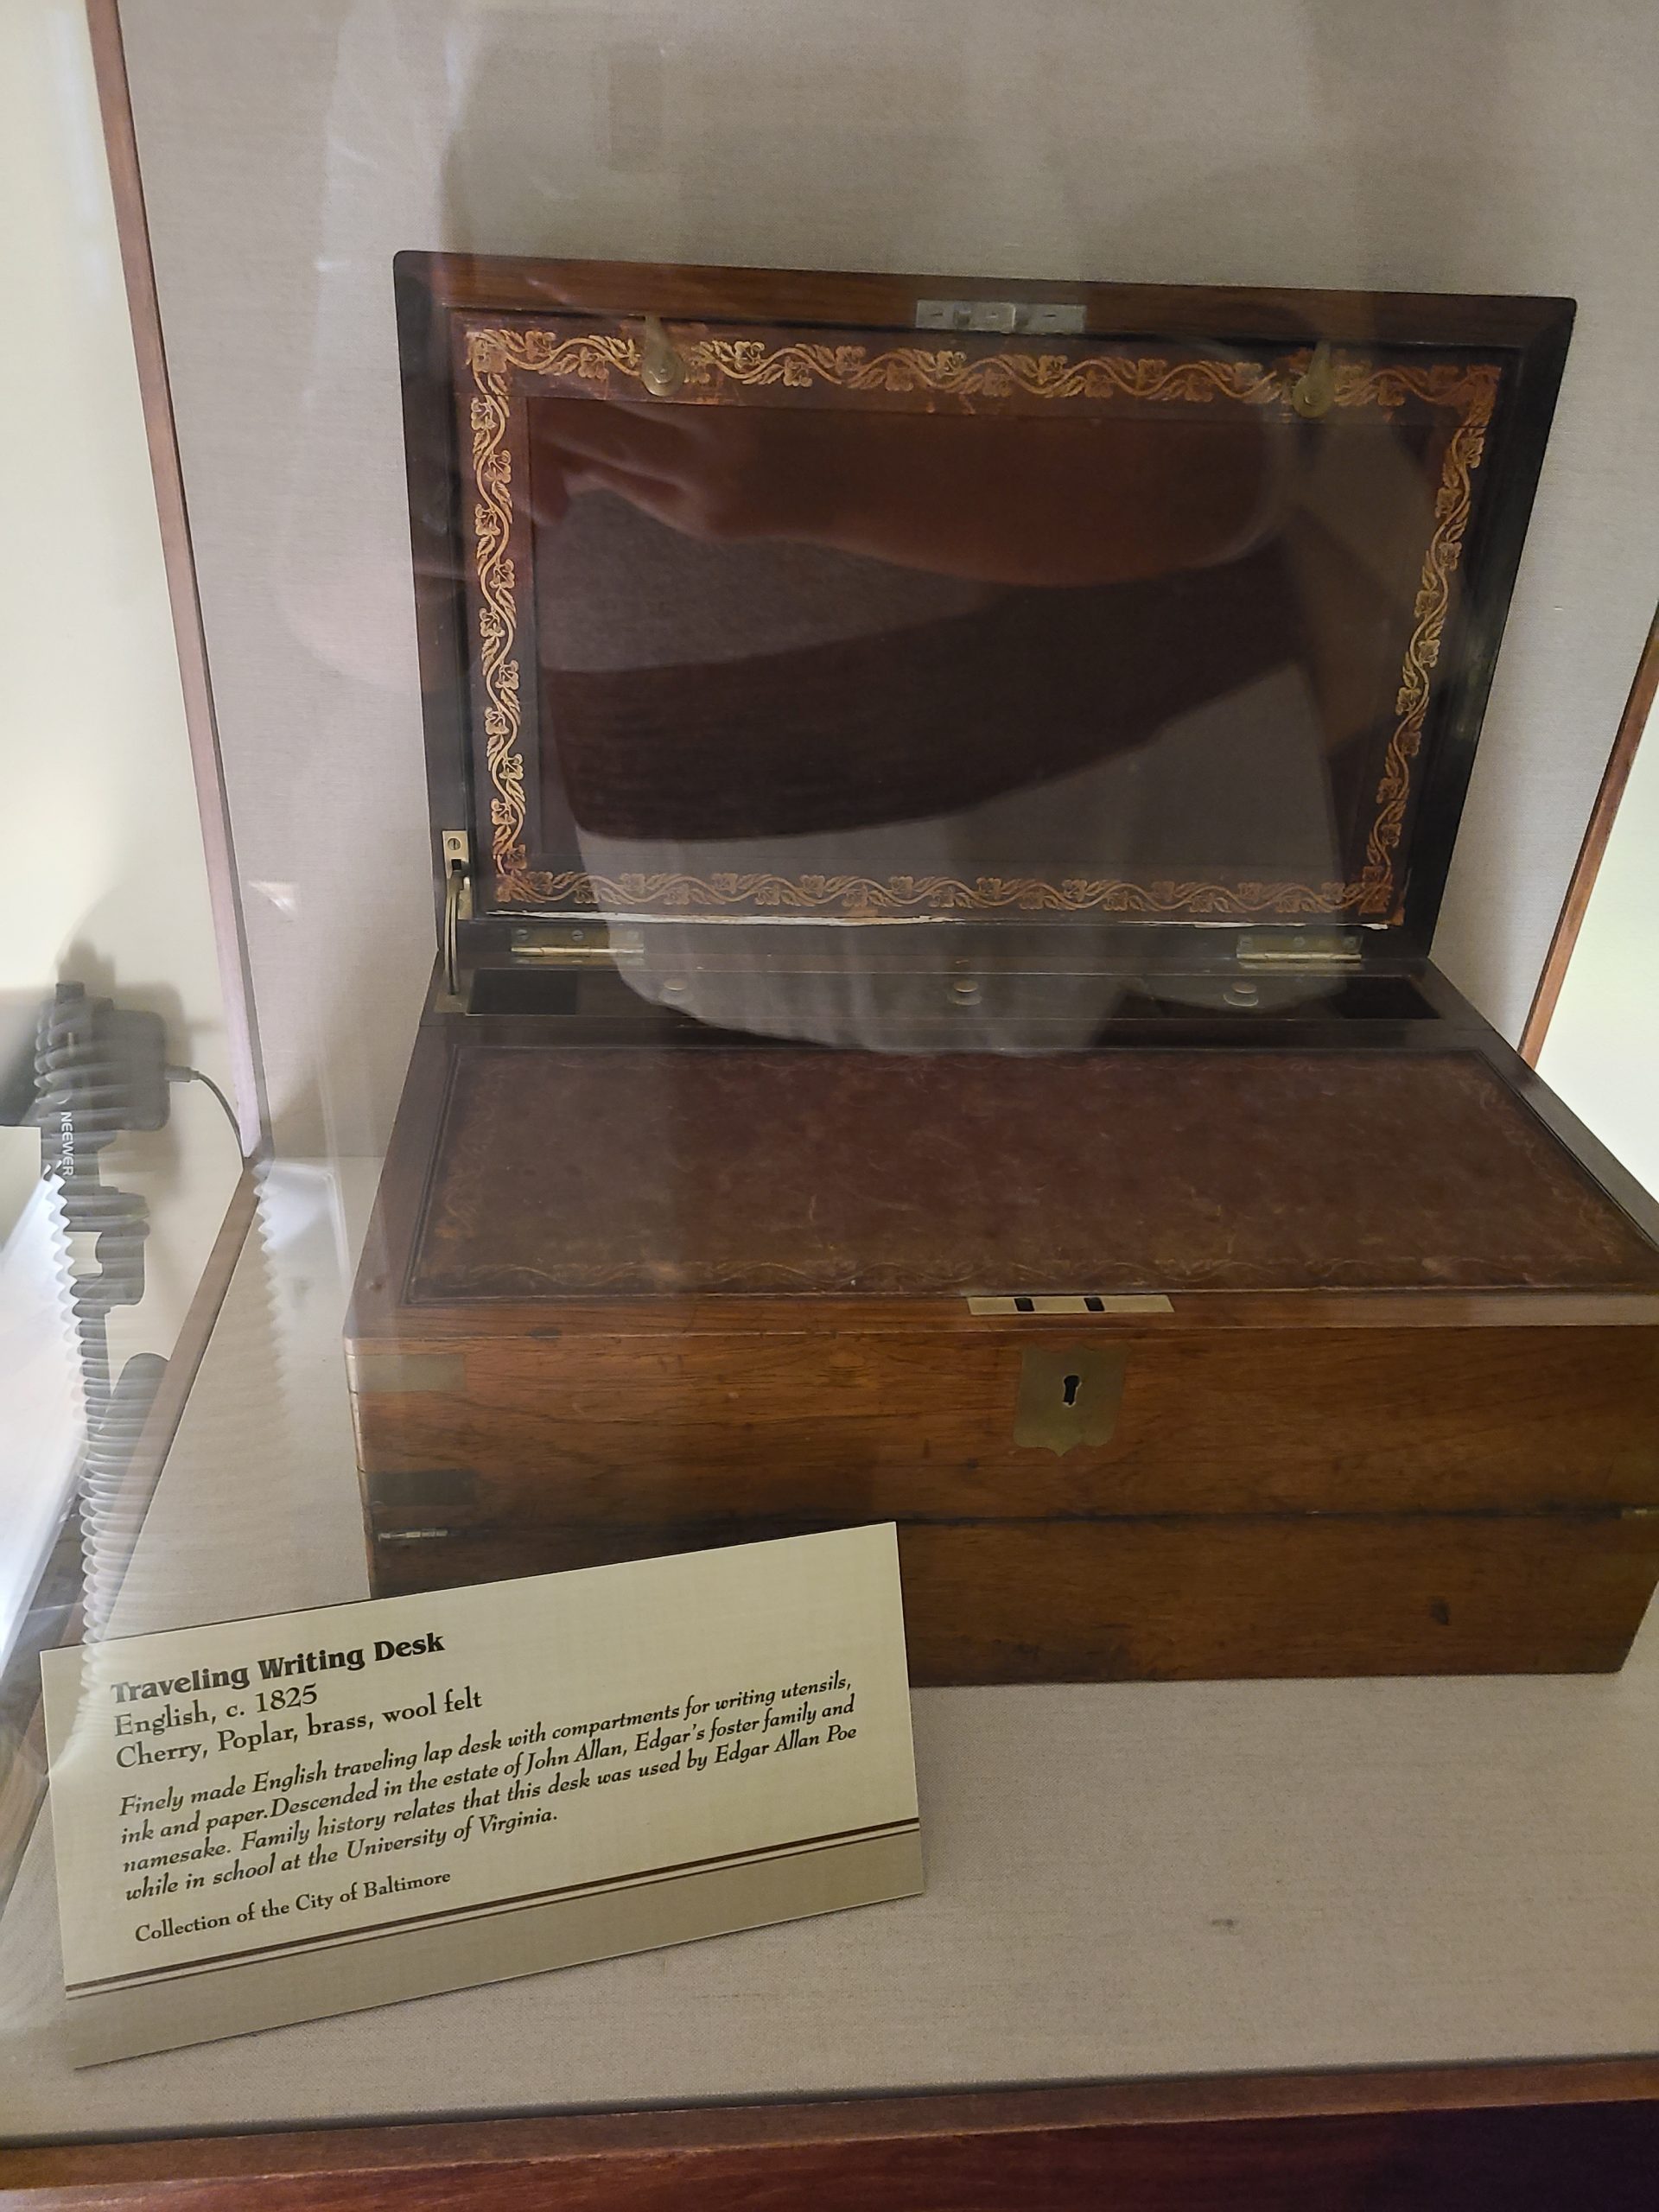 A writing desk believed to have been used by Edgar Allan Poe